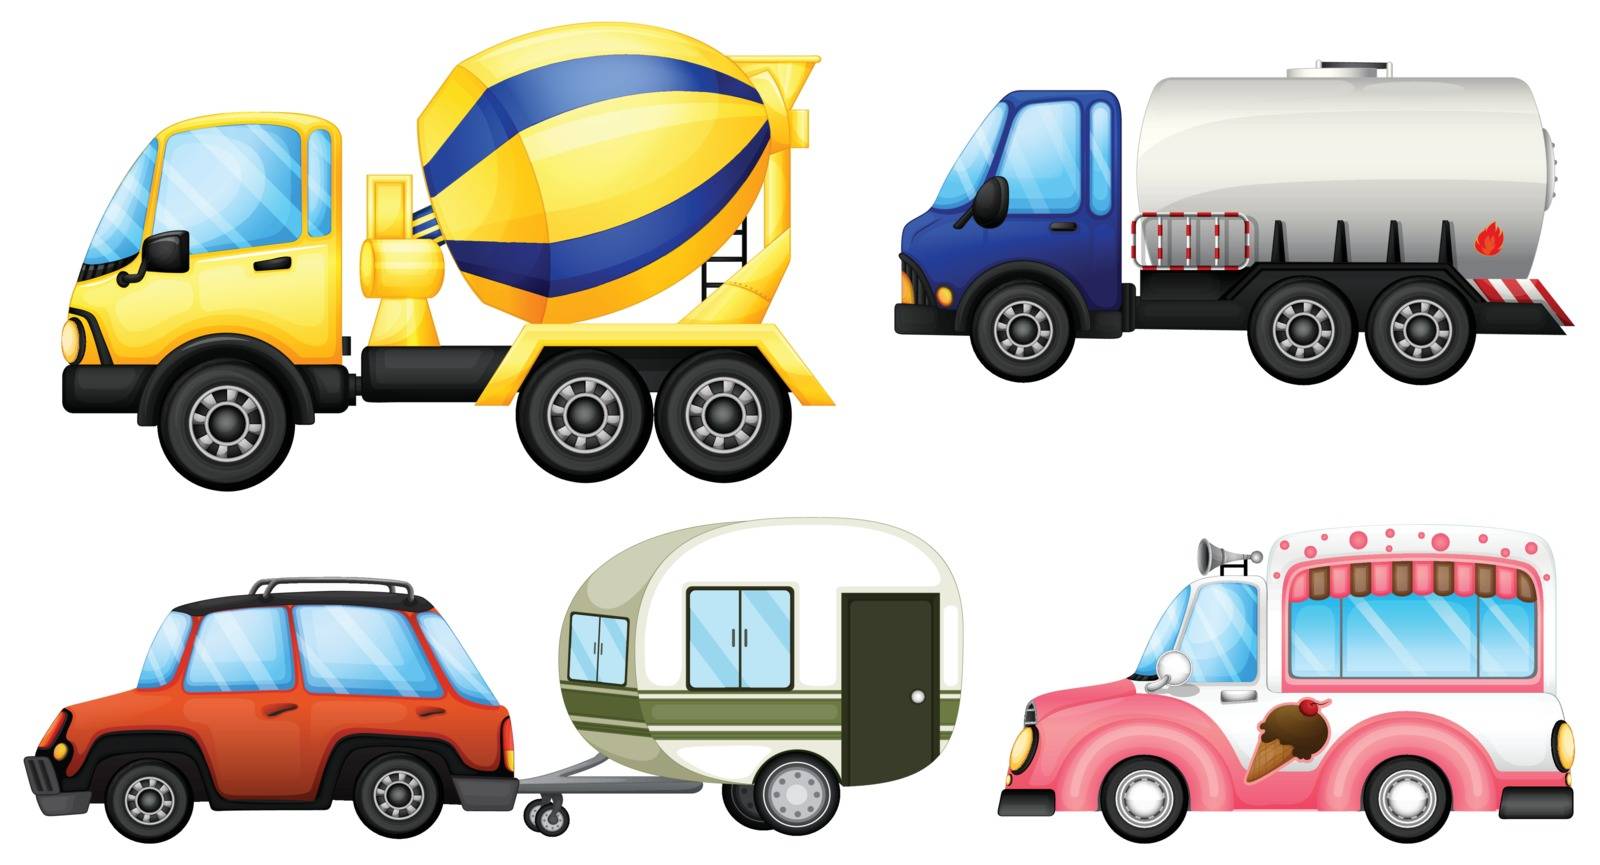 Illustration of the useful vehicles on a white background